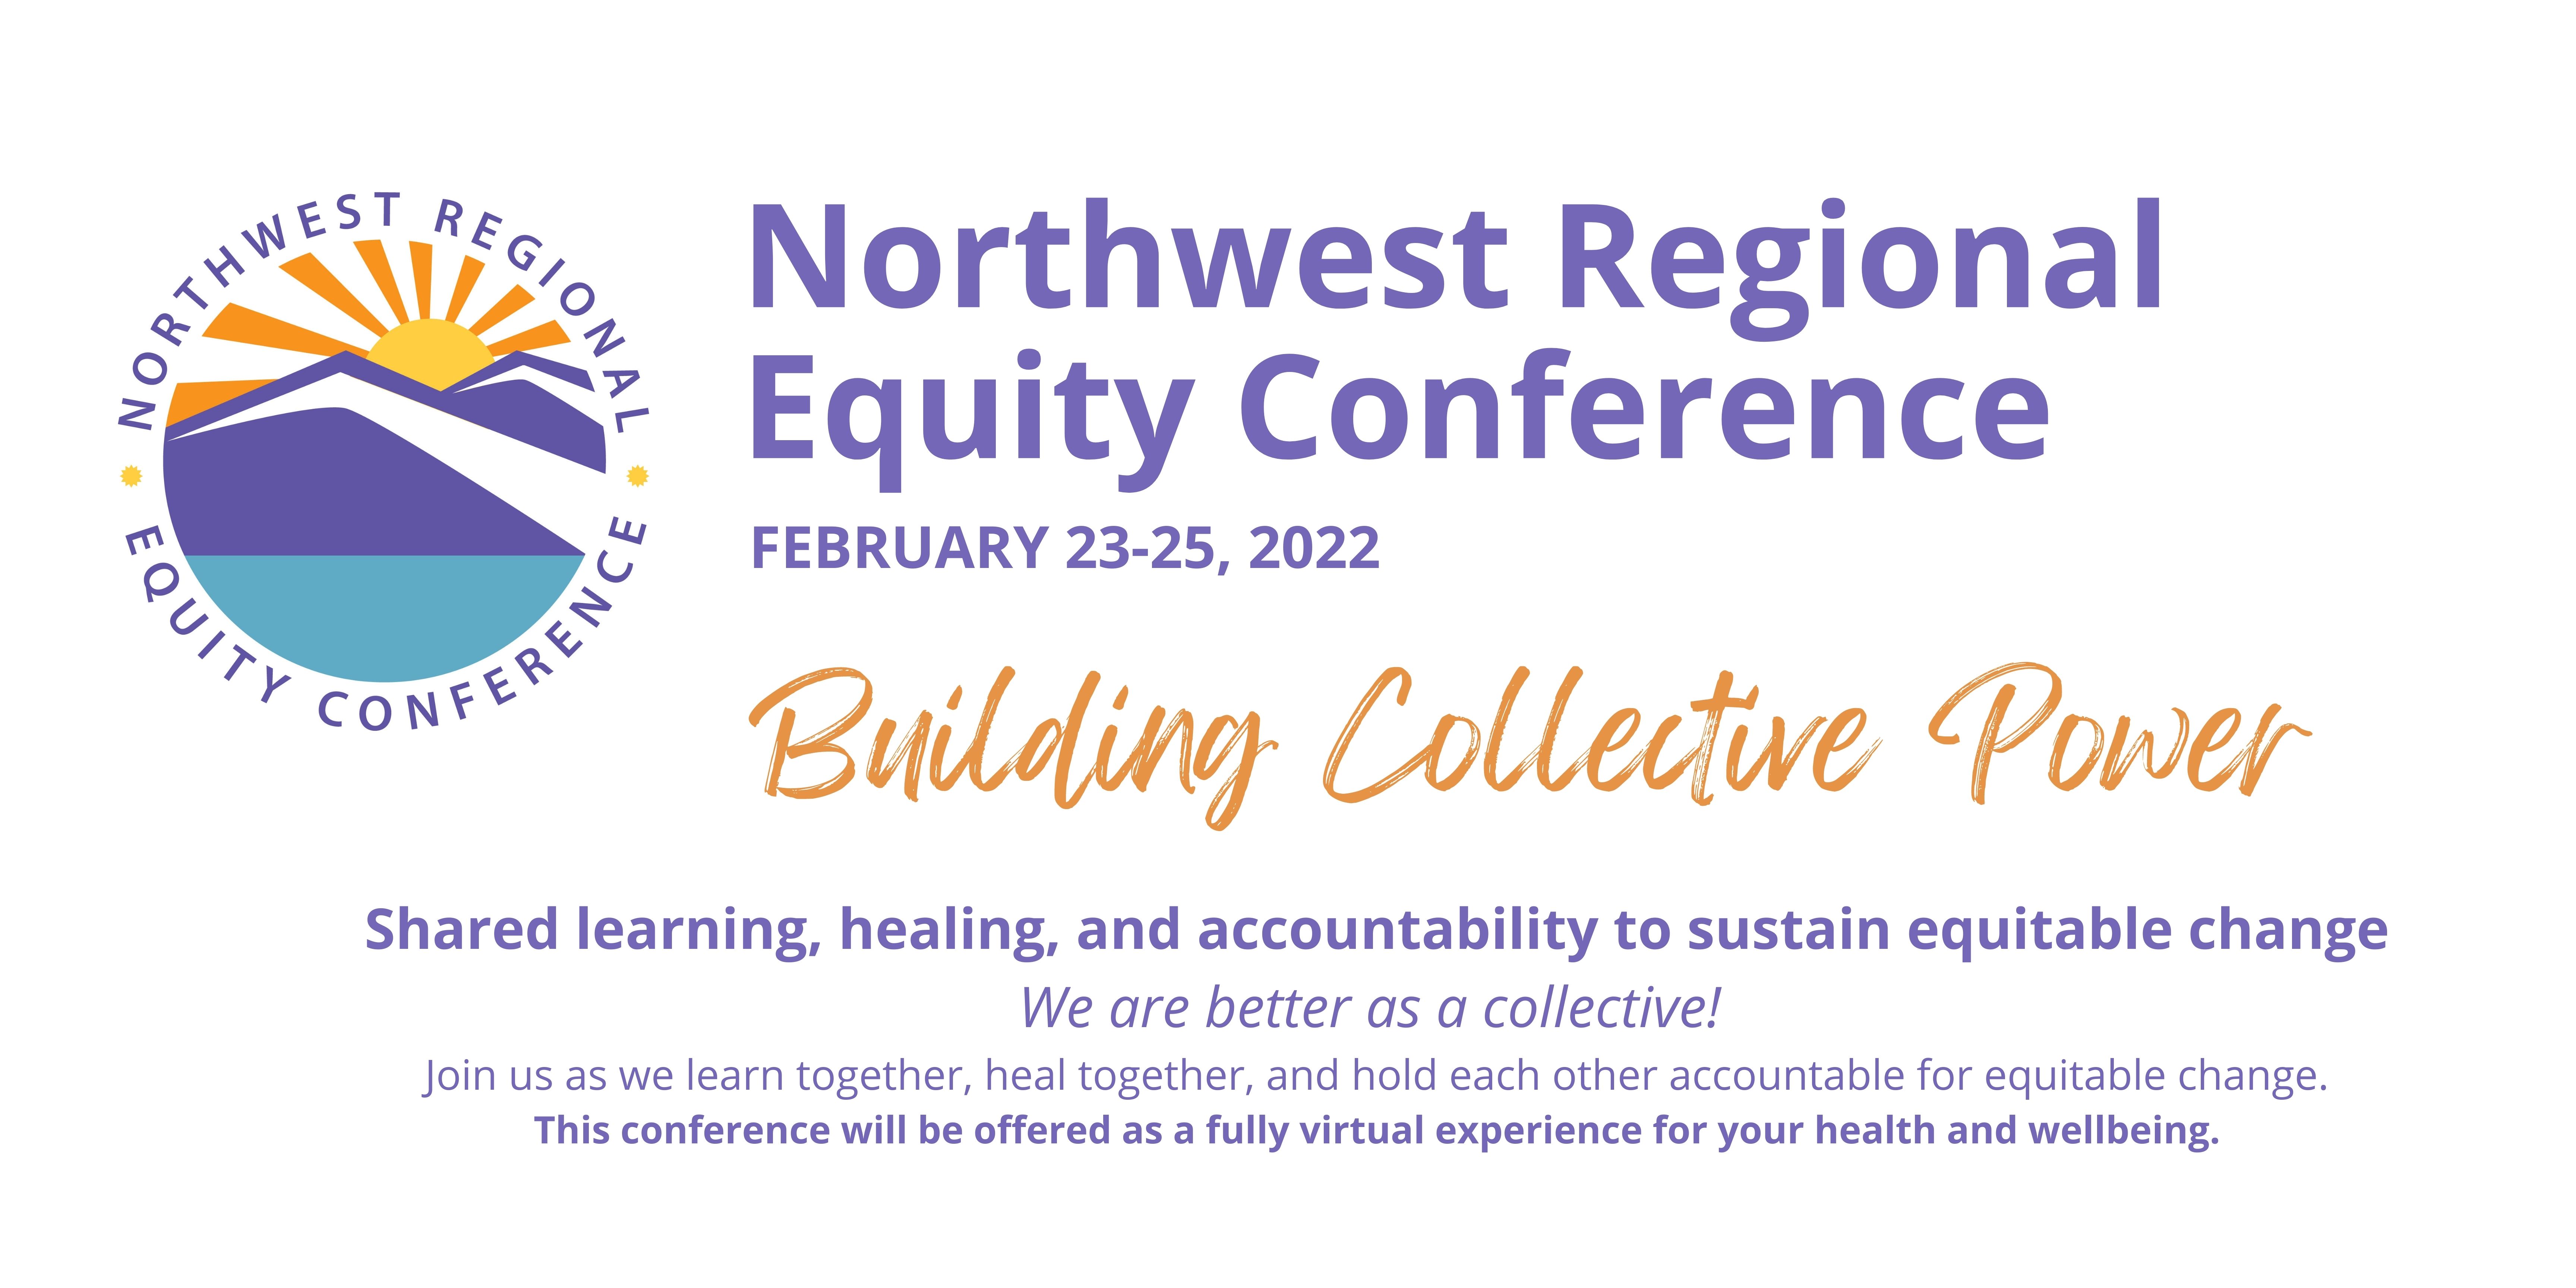 NW Regional Equity Conference